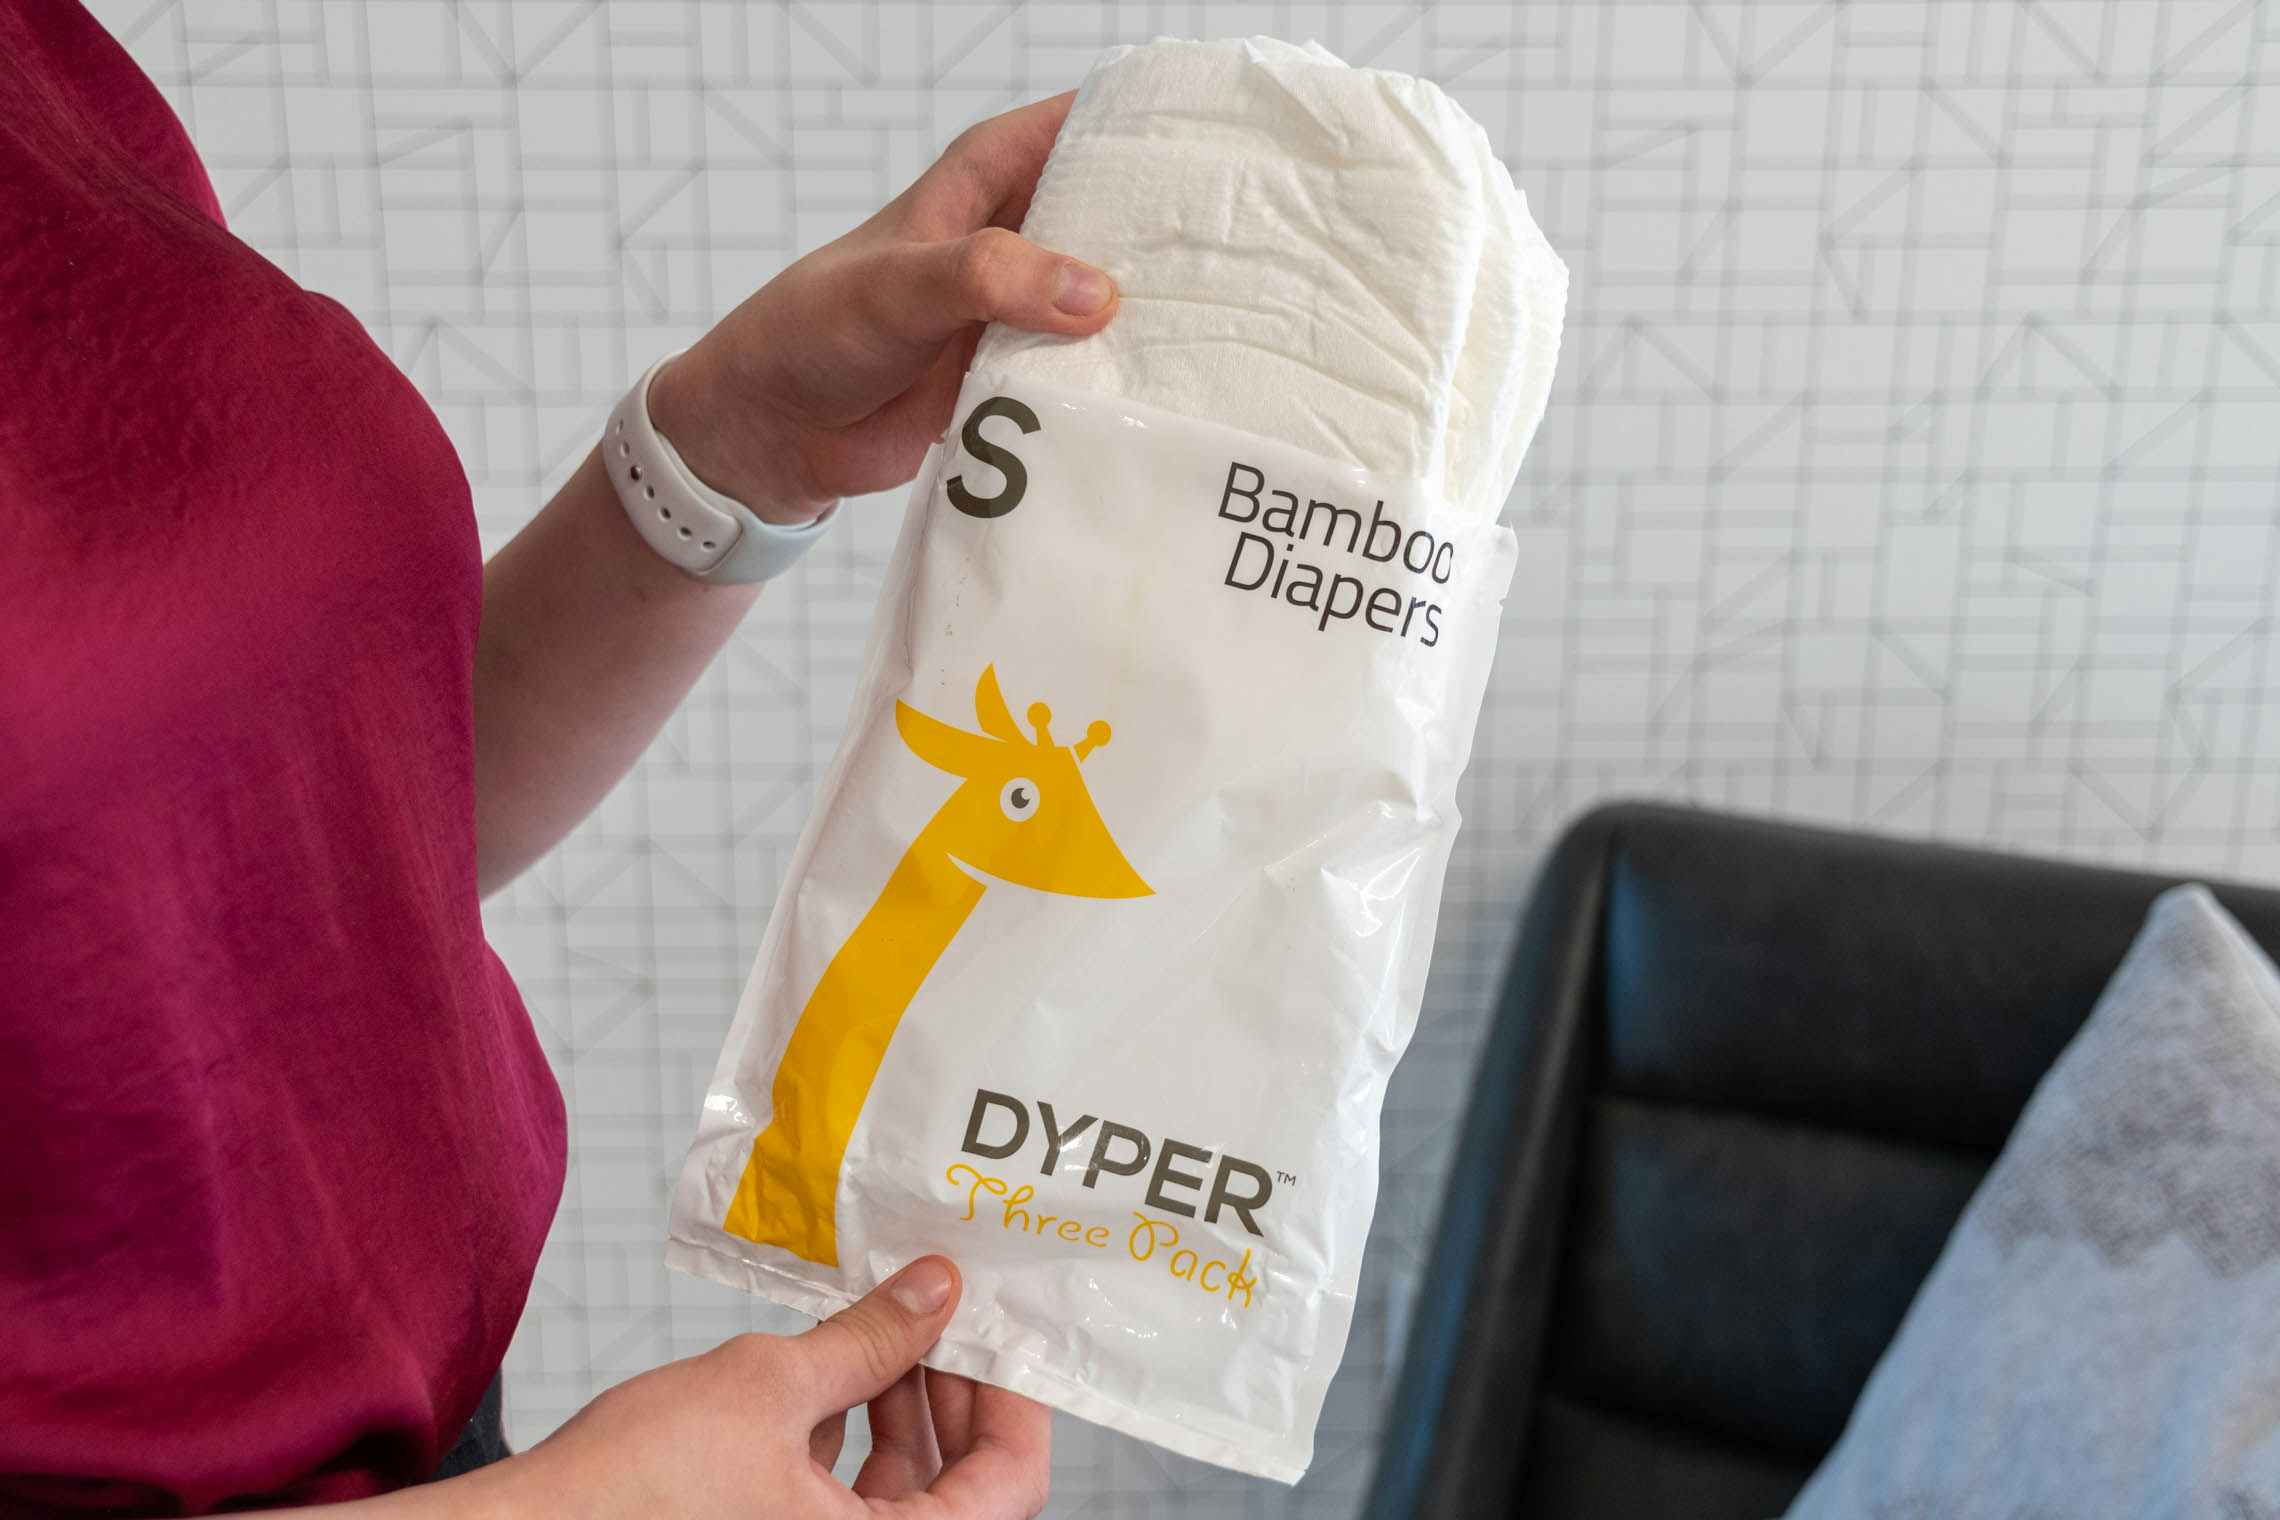 A woman holding up a Dyper bamboo diaper sample package.